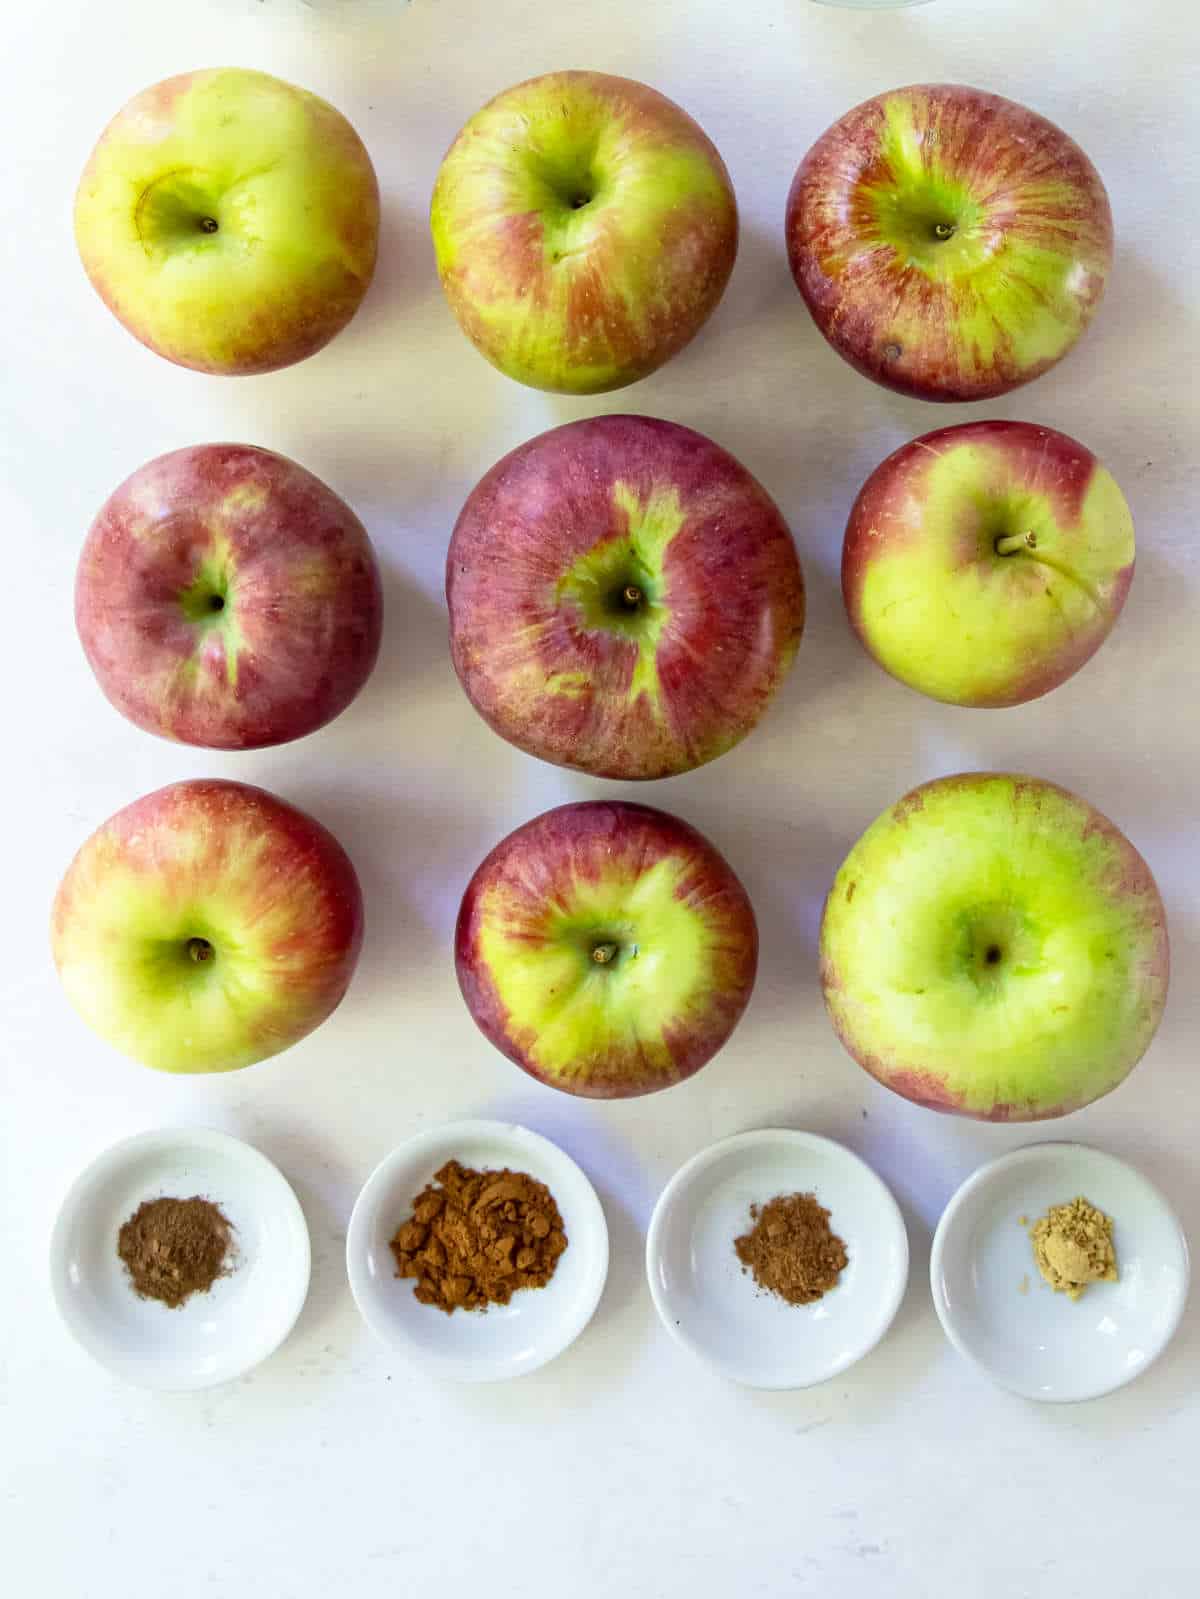 ingredients for making natural homemade unsweetened apple sauce.